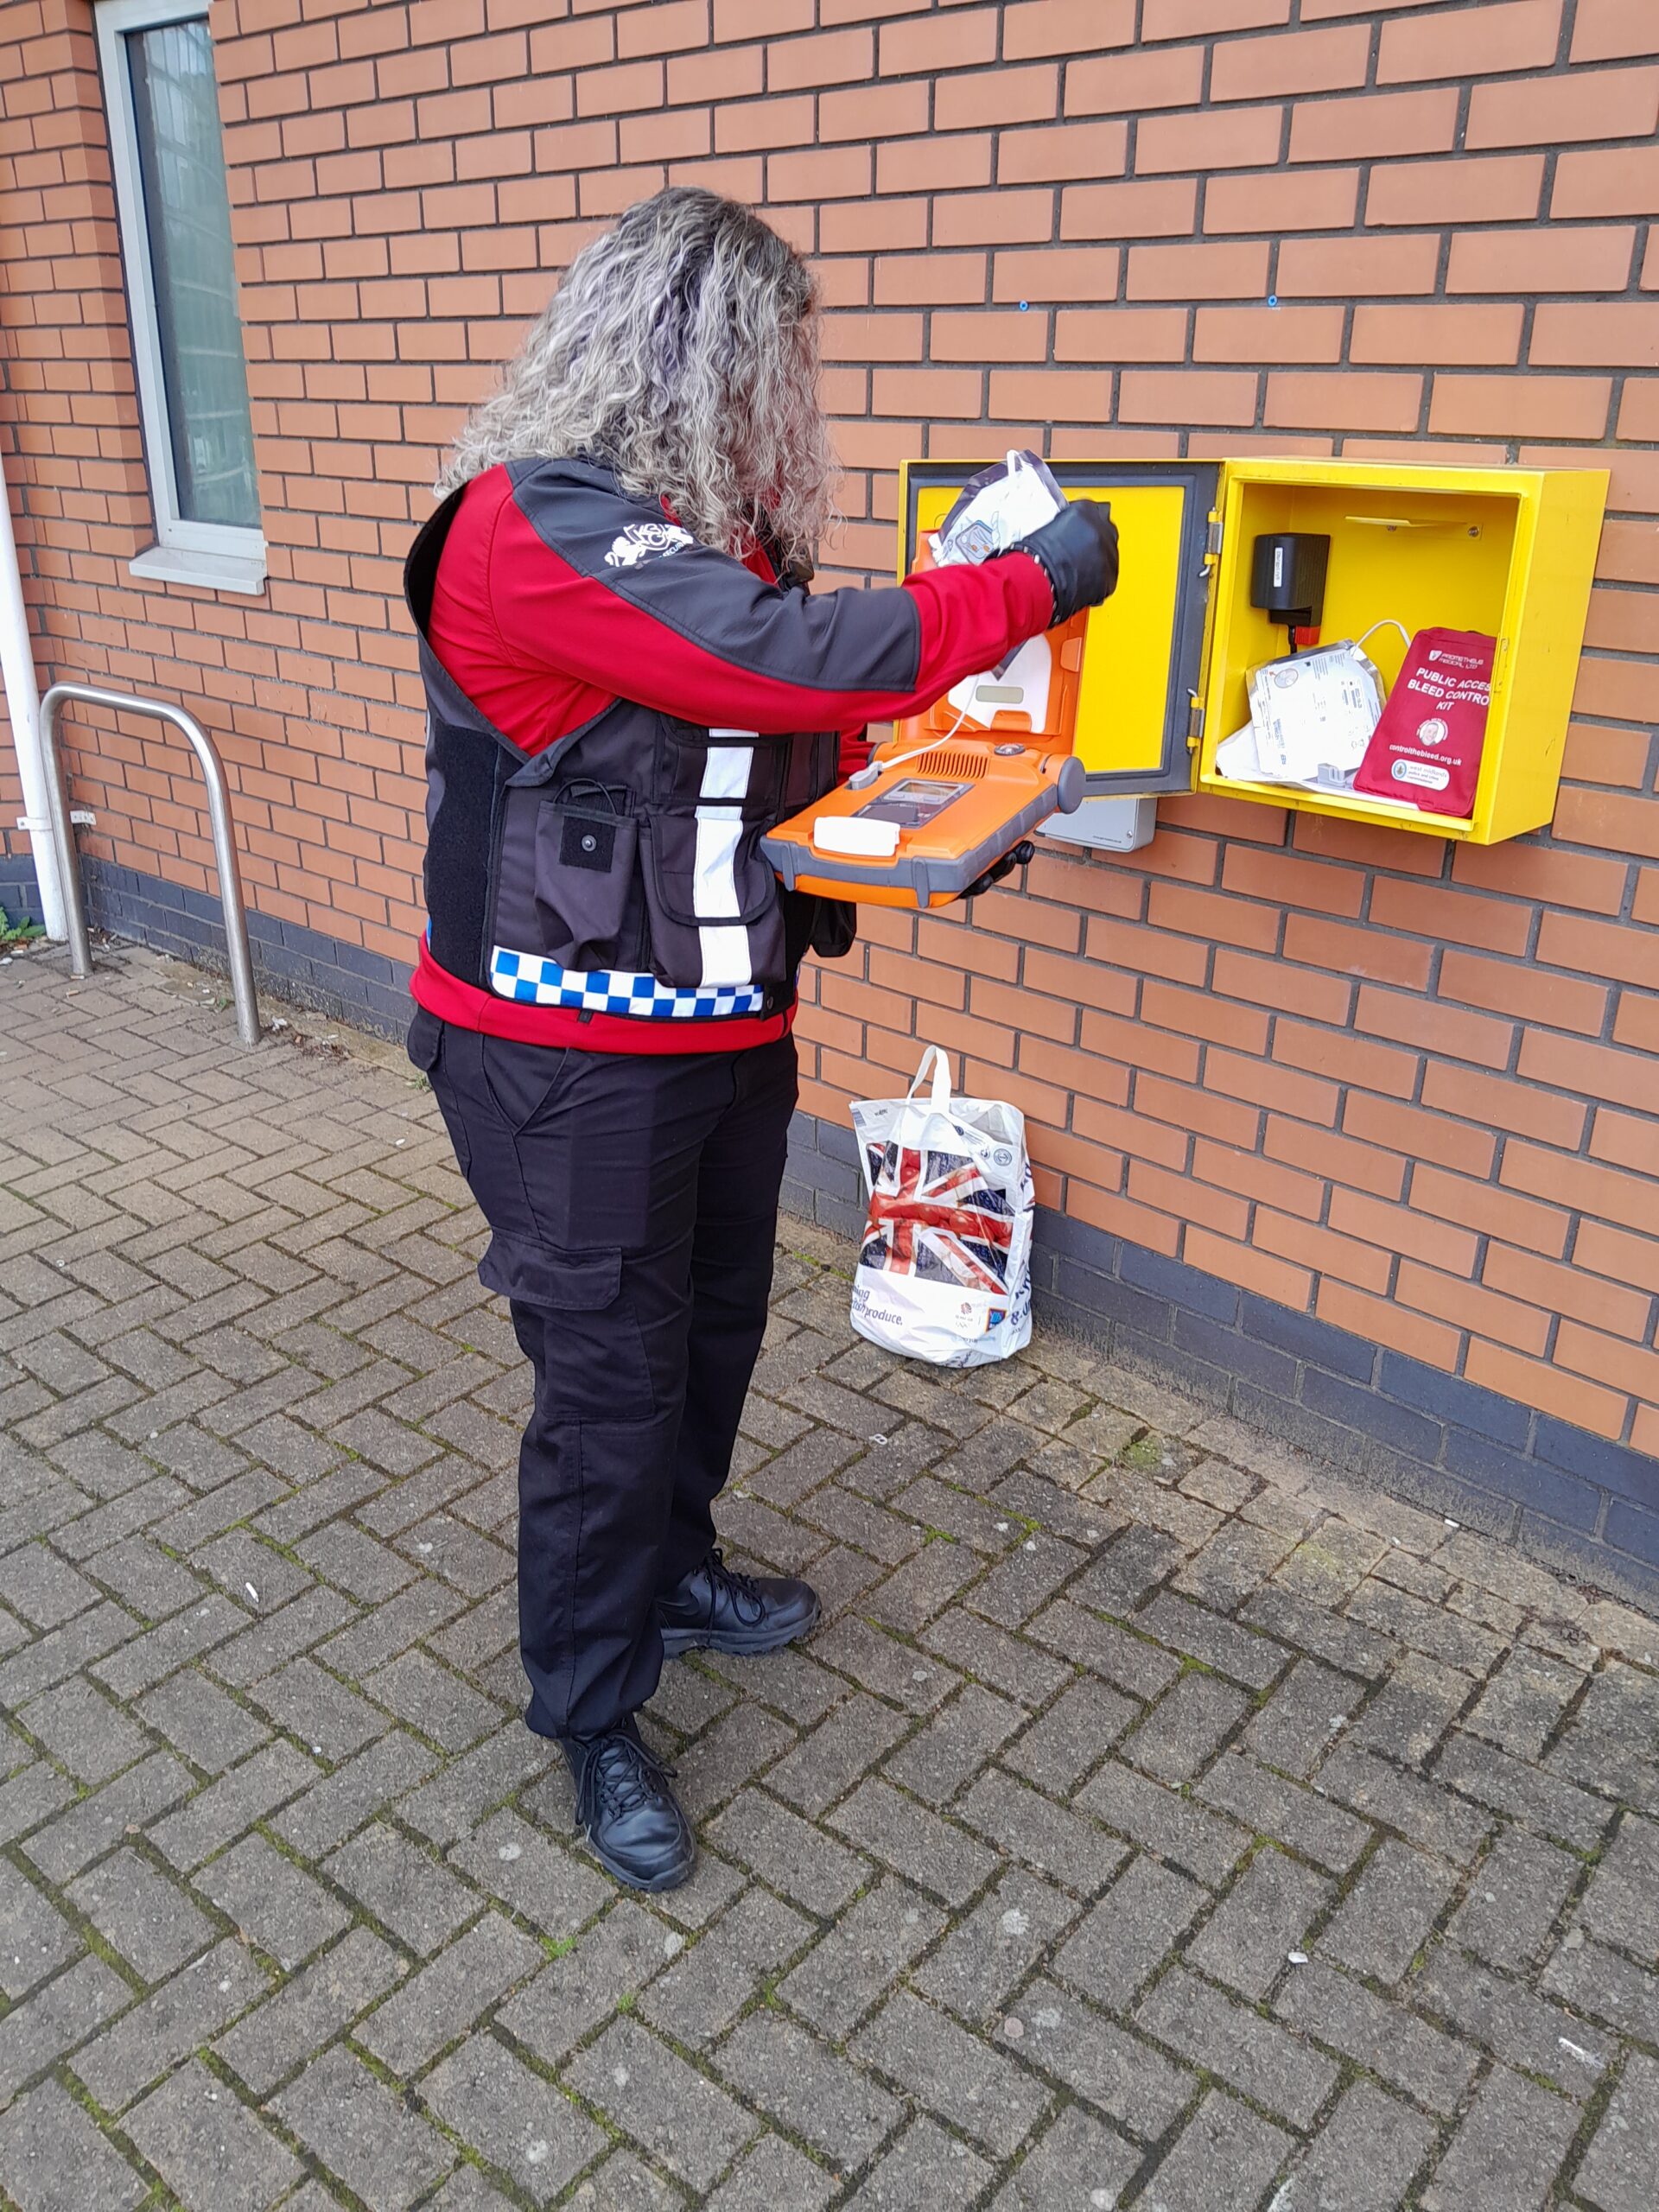 Today we have replaced defib pad at West Midlands Police West Bromwich, Moor Street which was due to expire